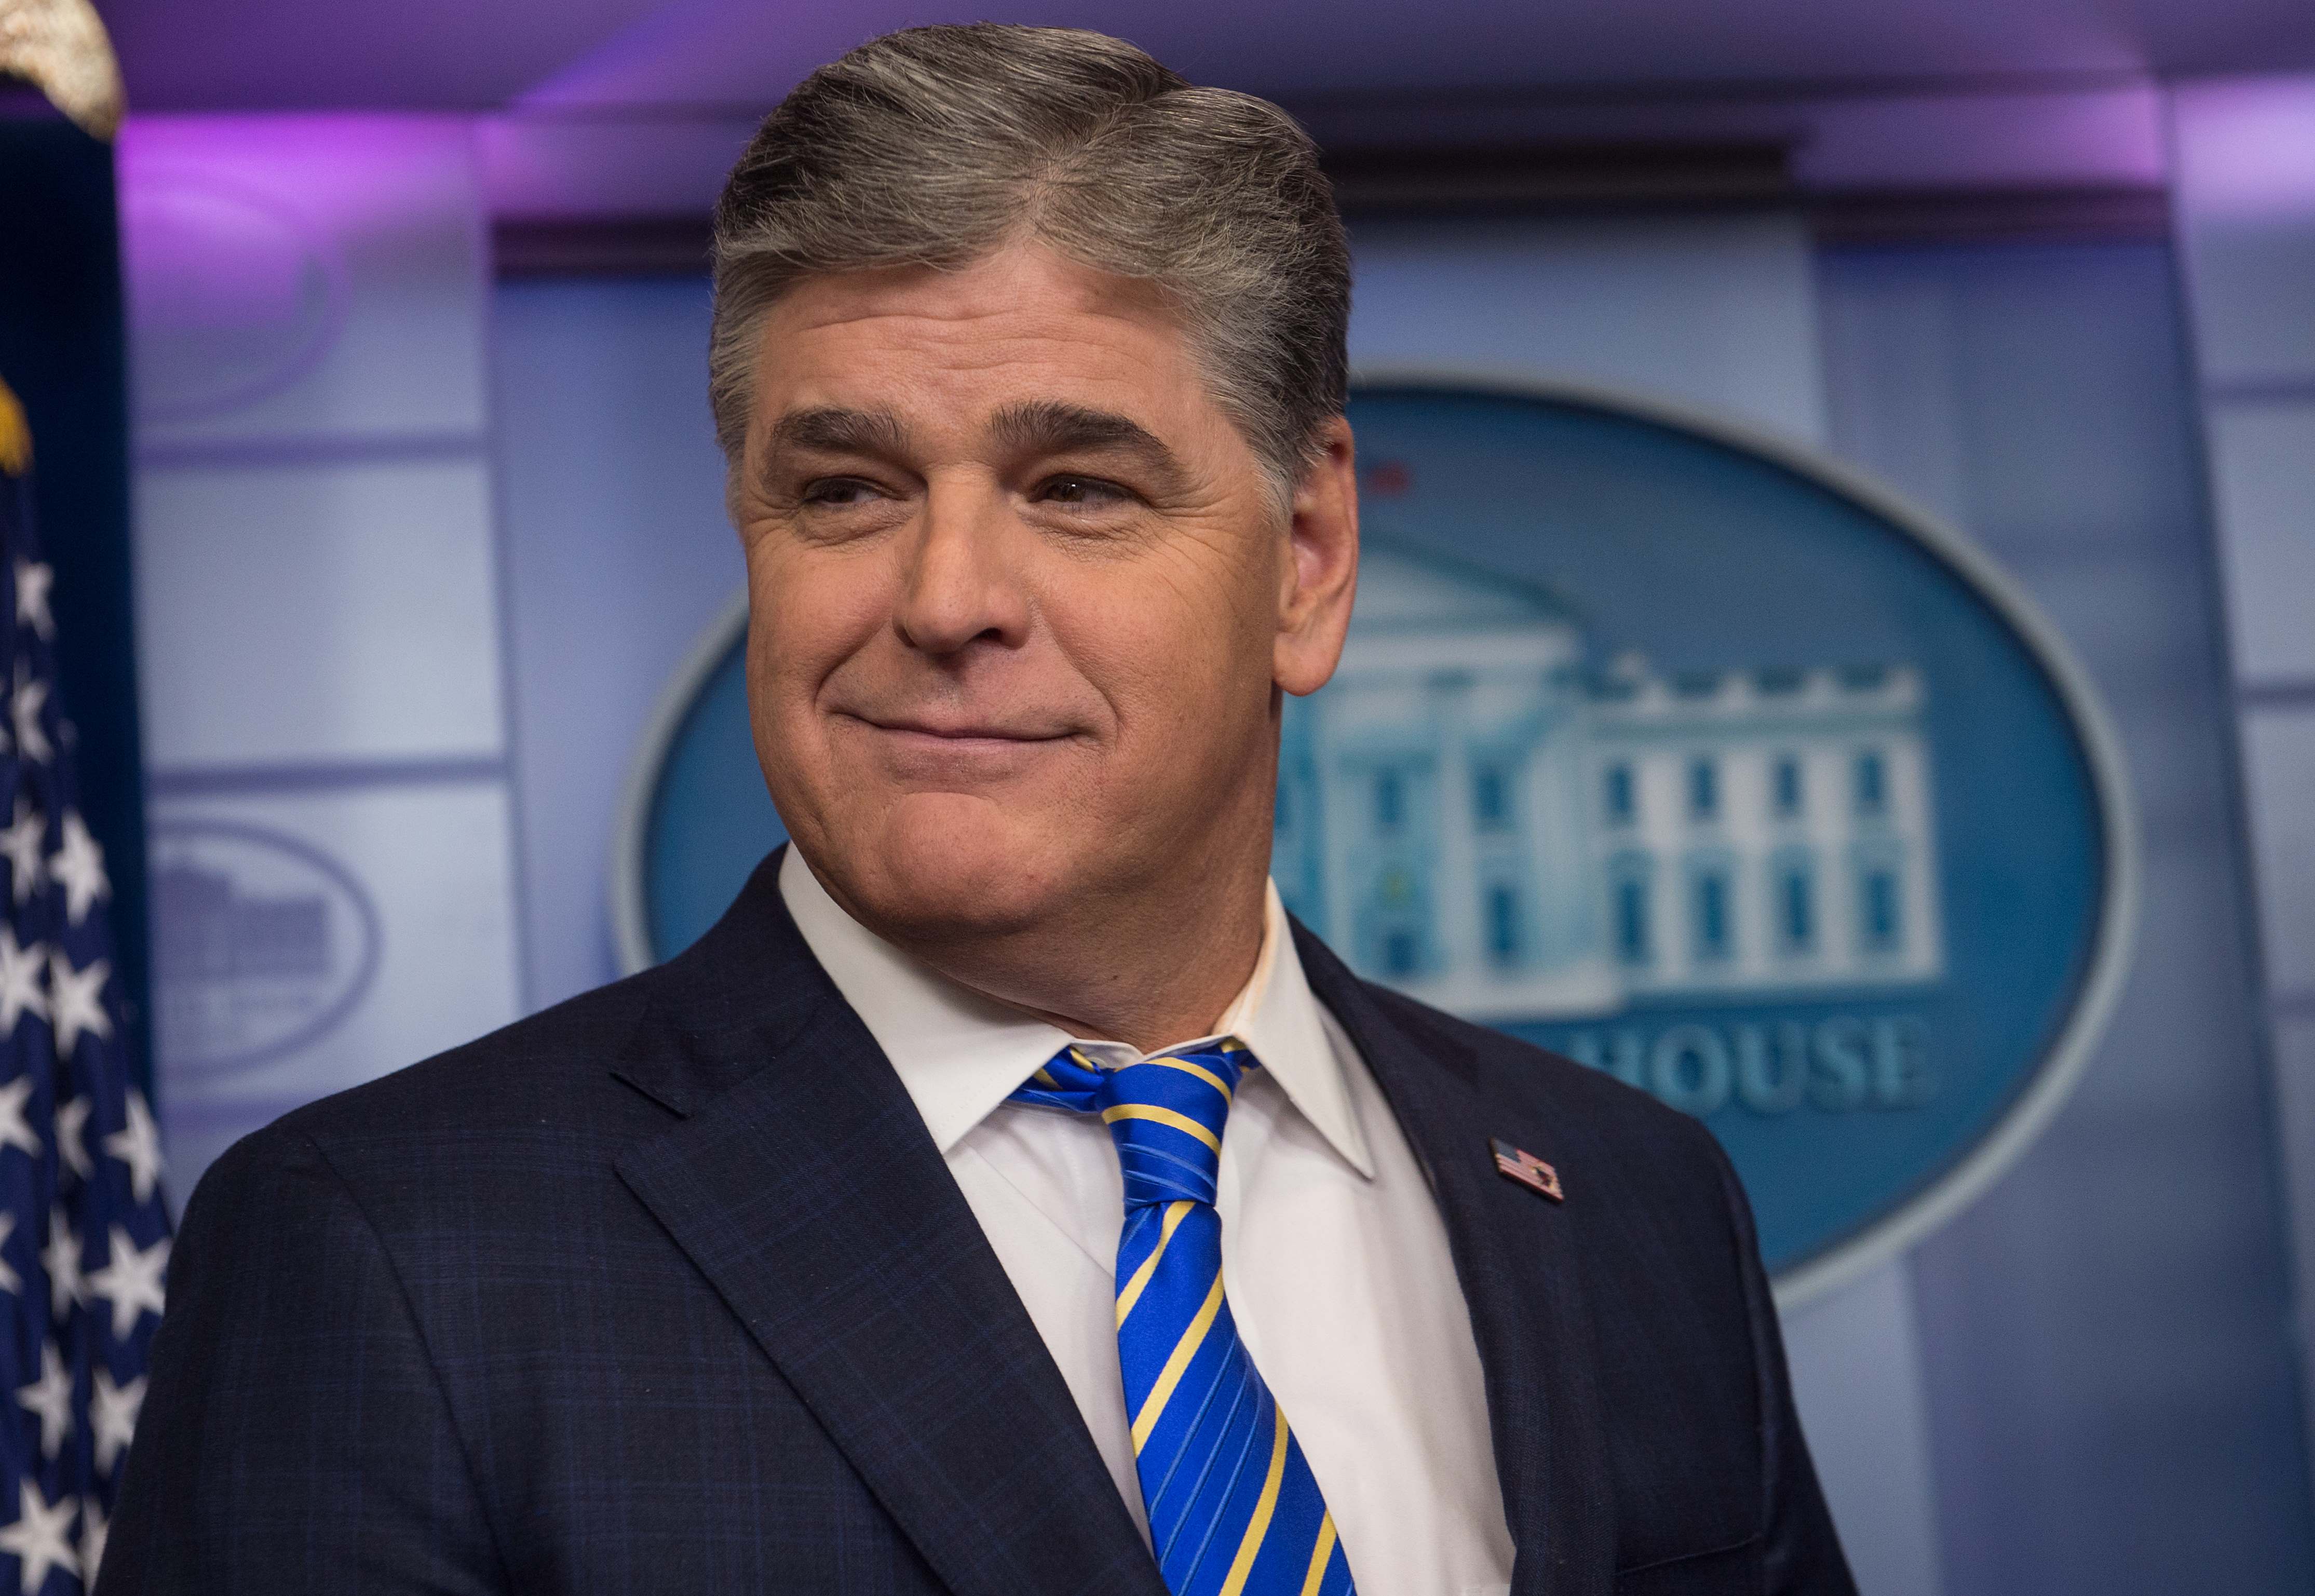 Sean Hannity inside the White House briefing room on January 24, 2017 | Source: Getty Images